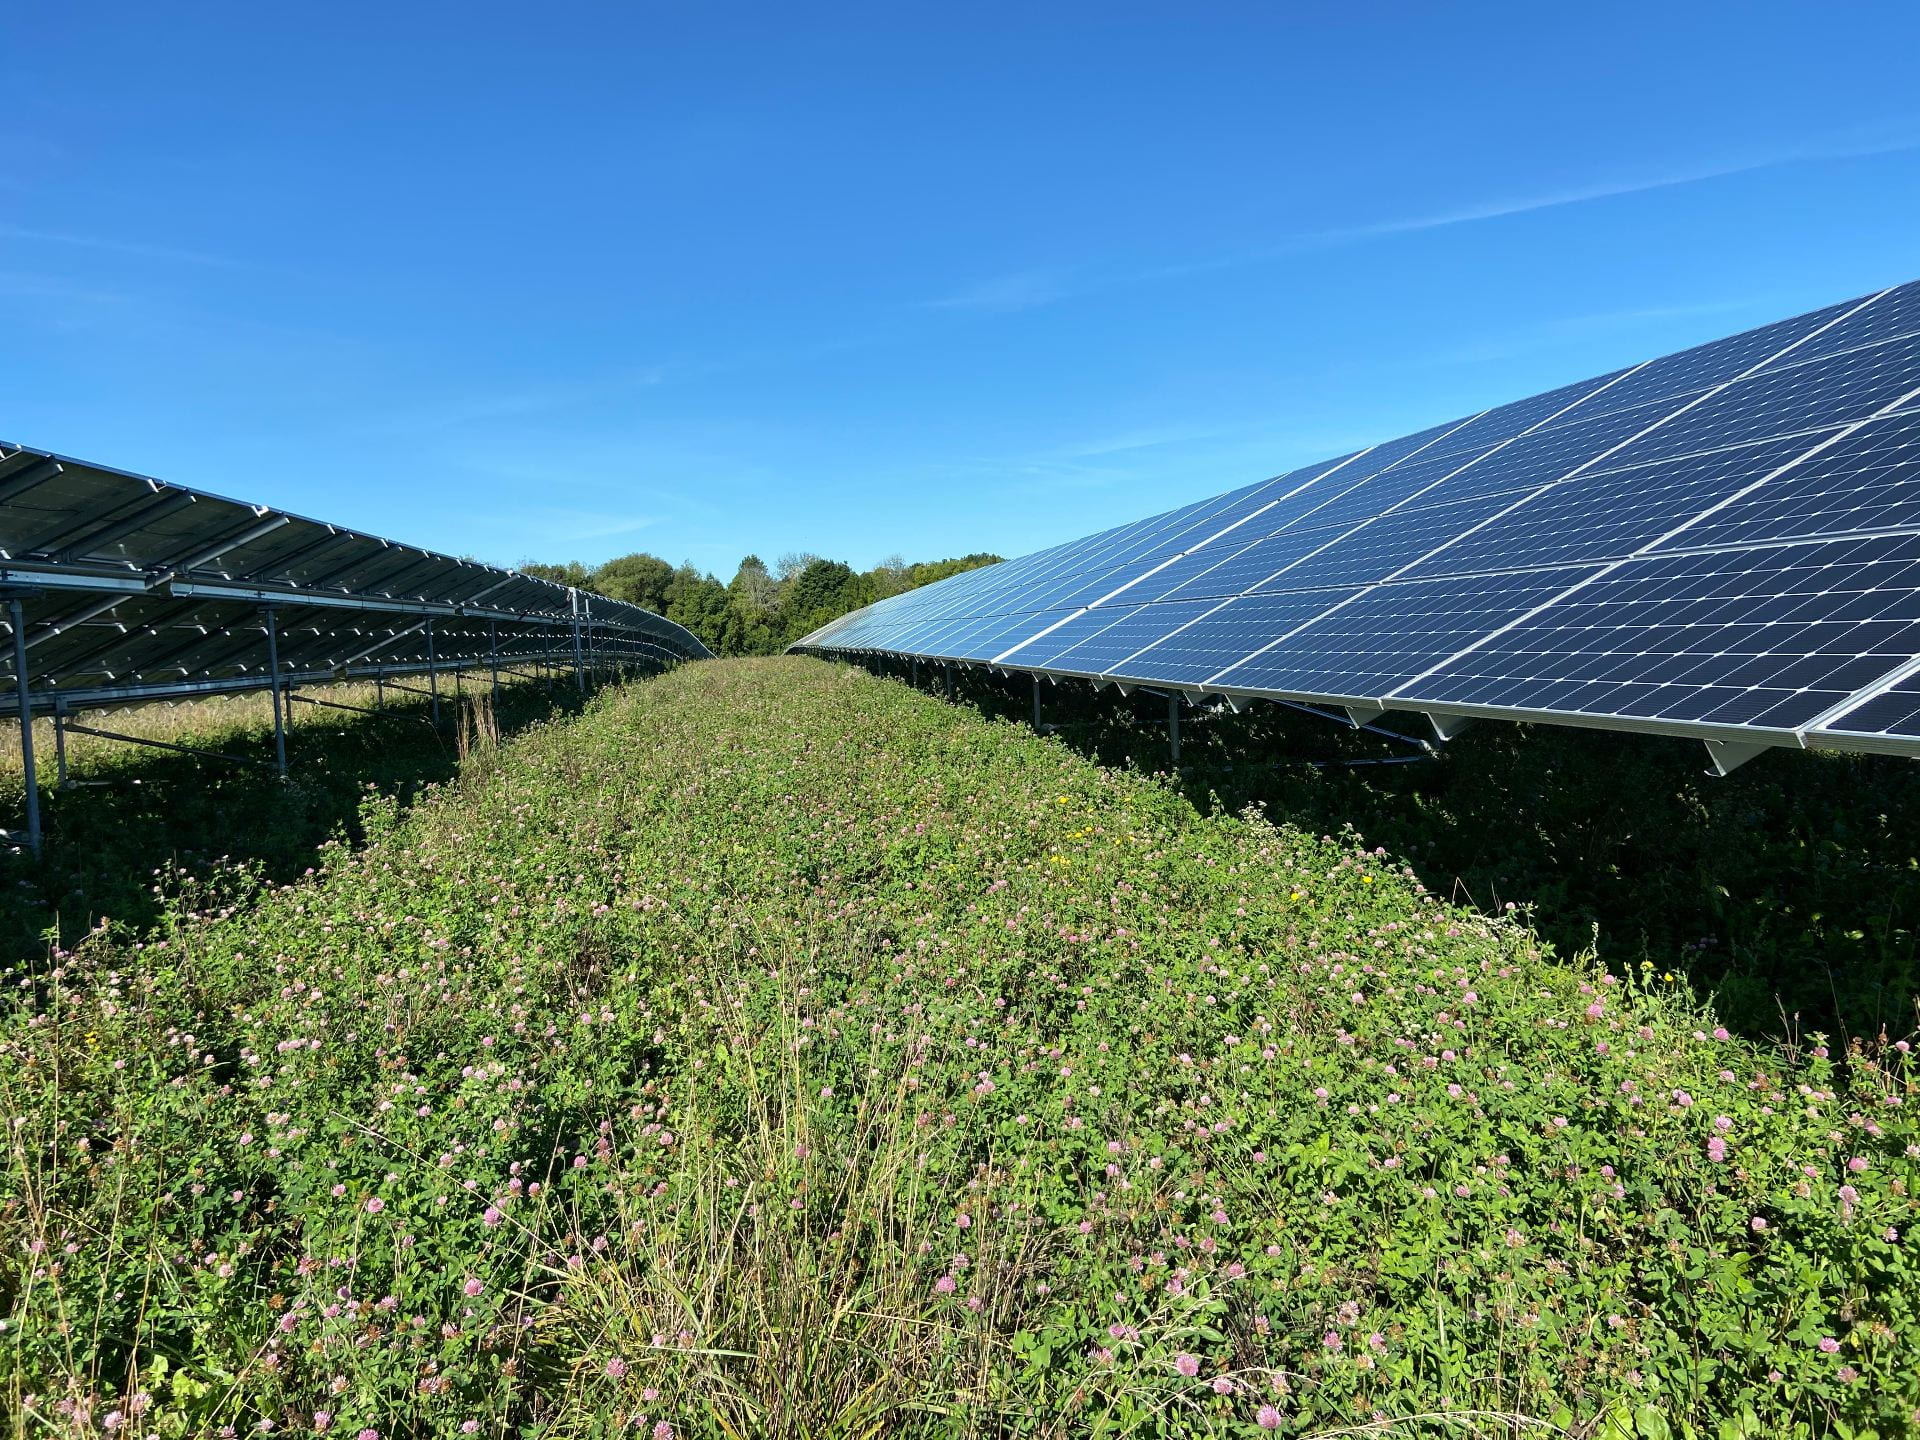 Looking down 2 long rows of large solar panels, with clover growing between the rows. Credit: Penn State MCOR